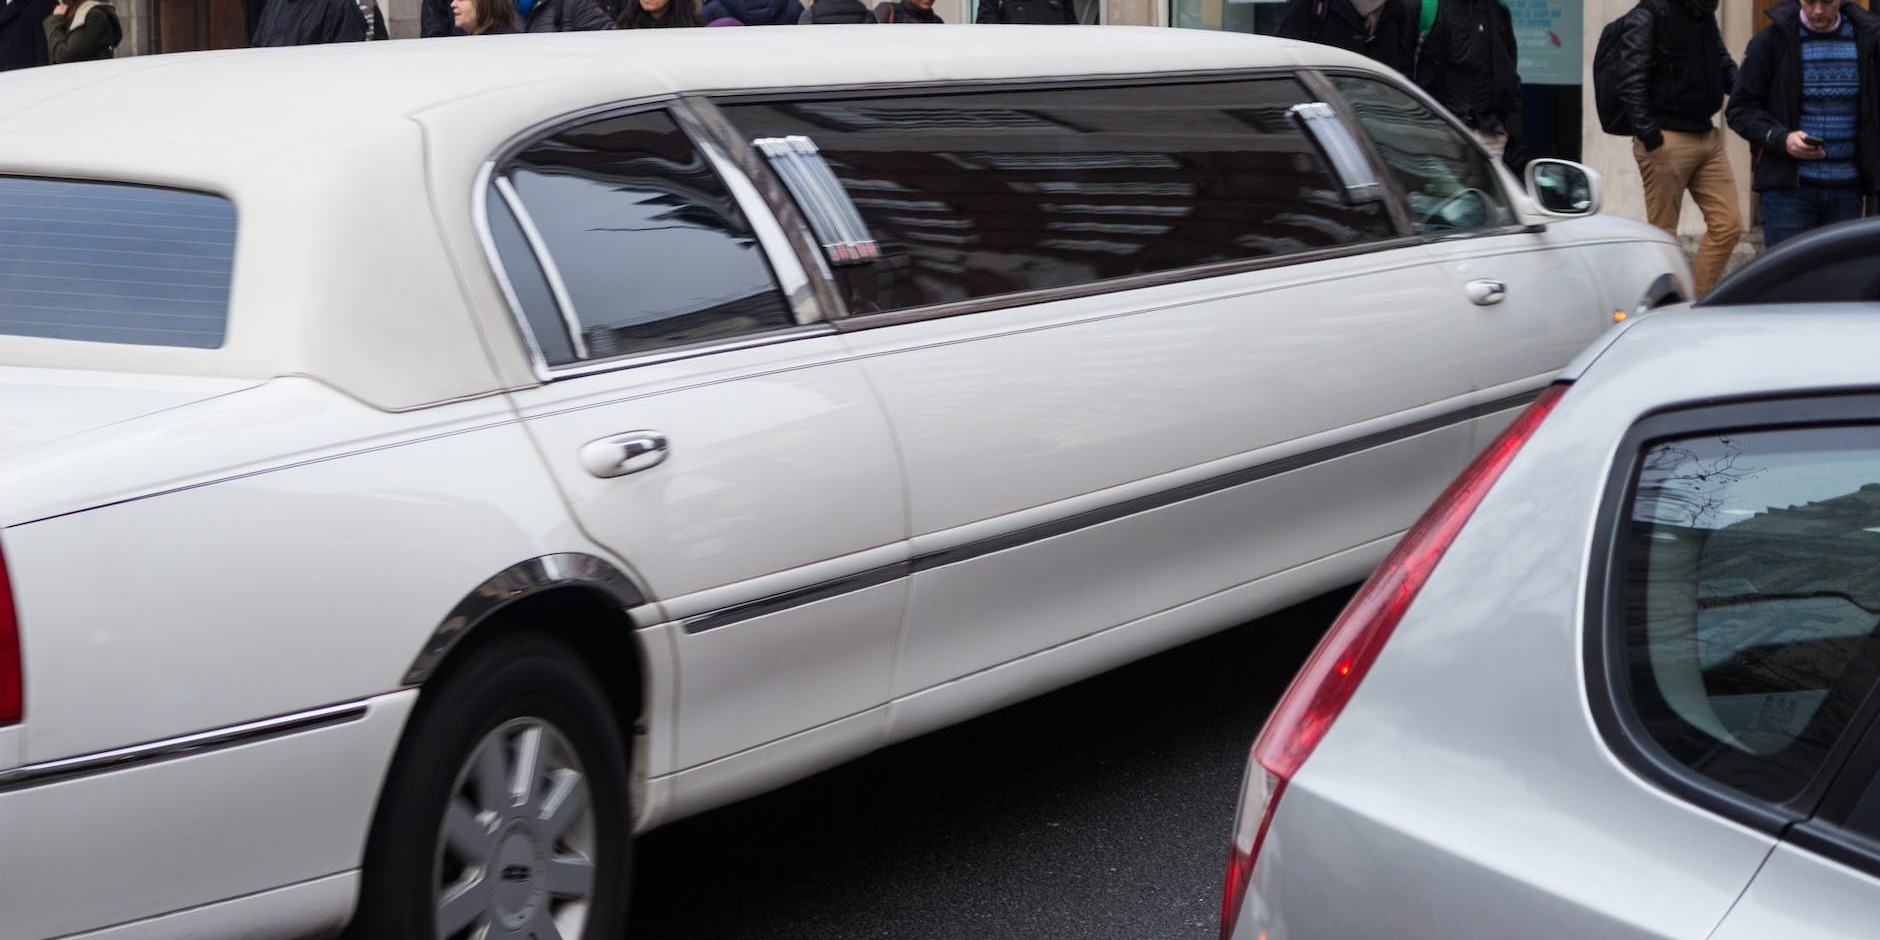 Top Tips for Choosing the Perfect Limo for Your Event